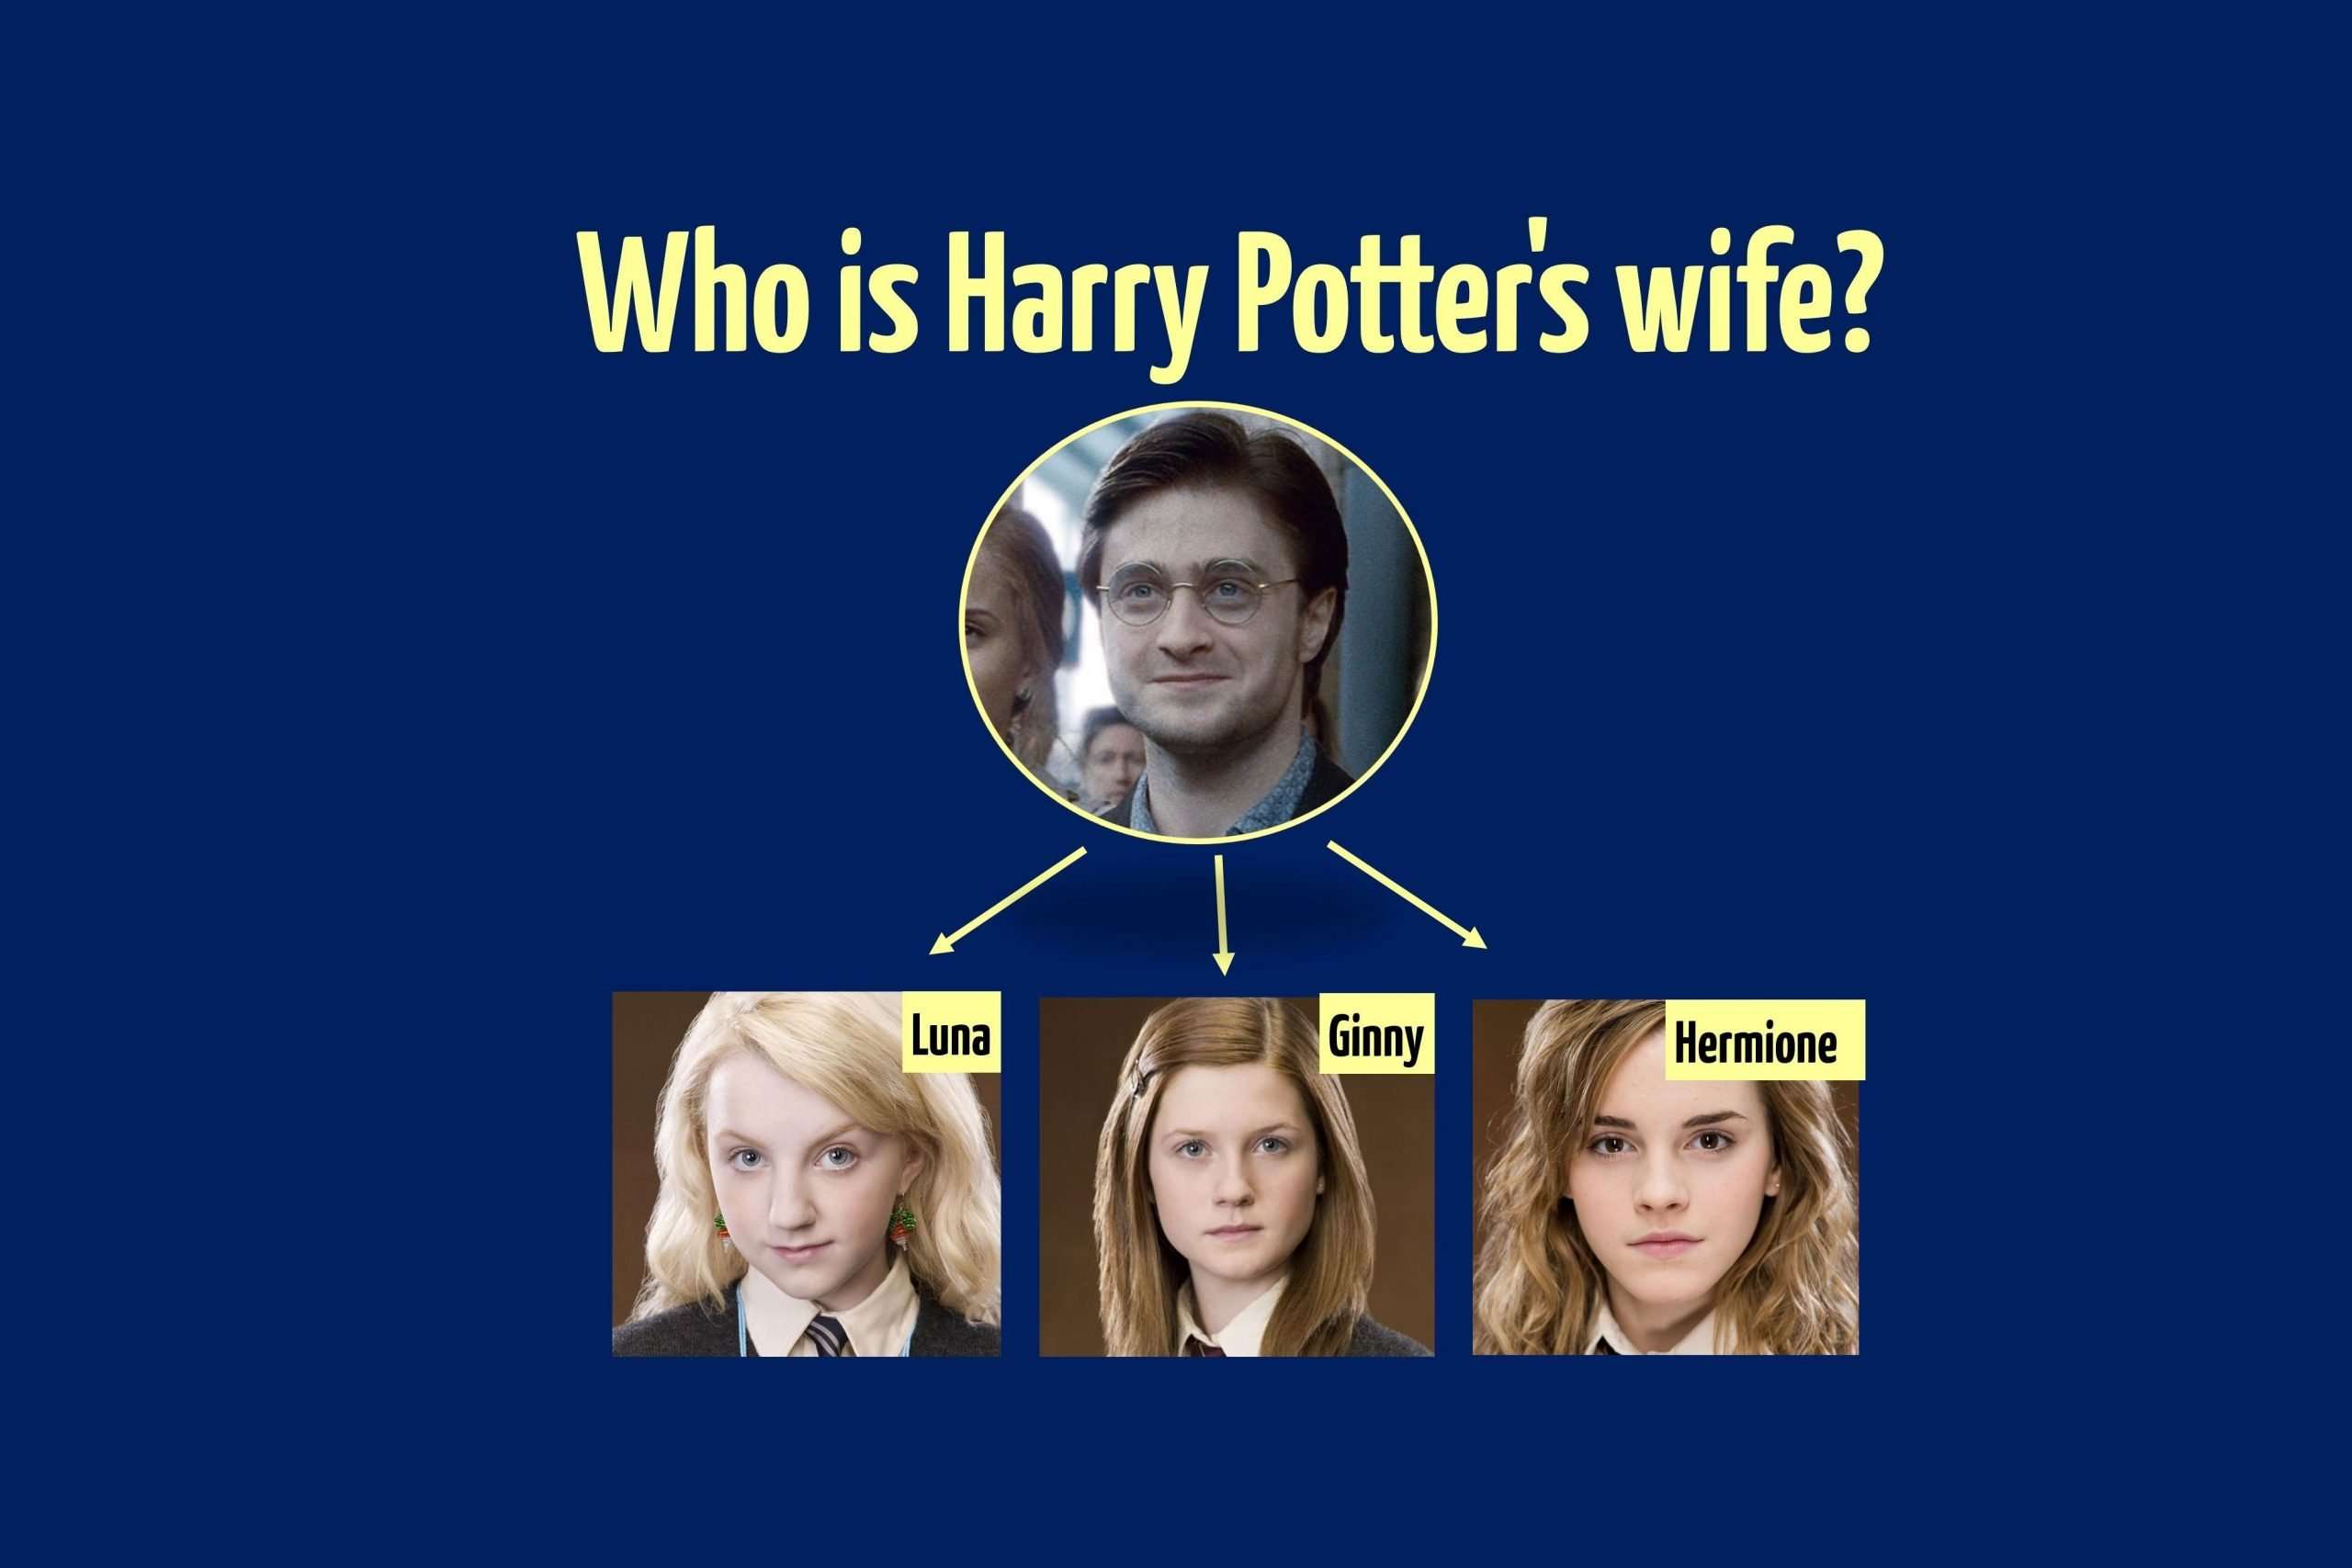 How Well Do You Know The Harry Potter Family Tree?